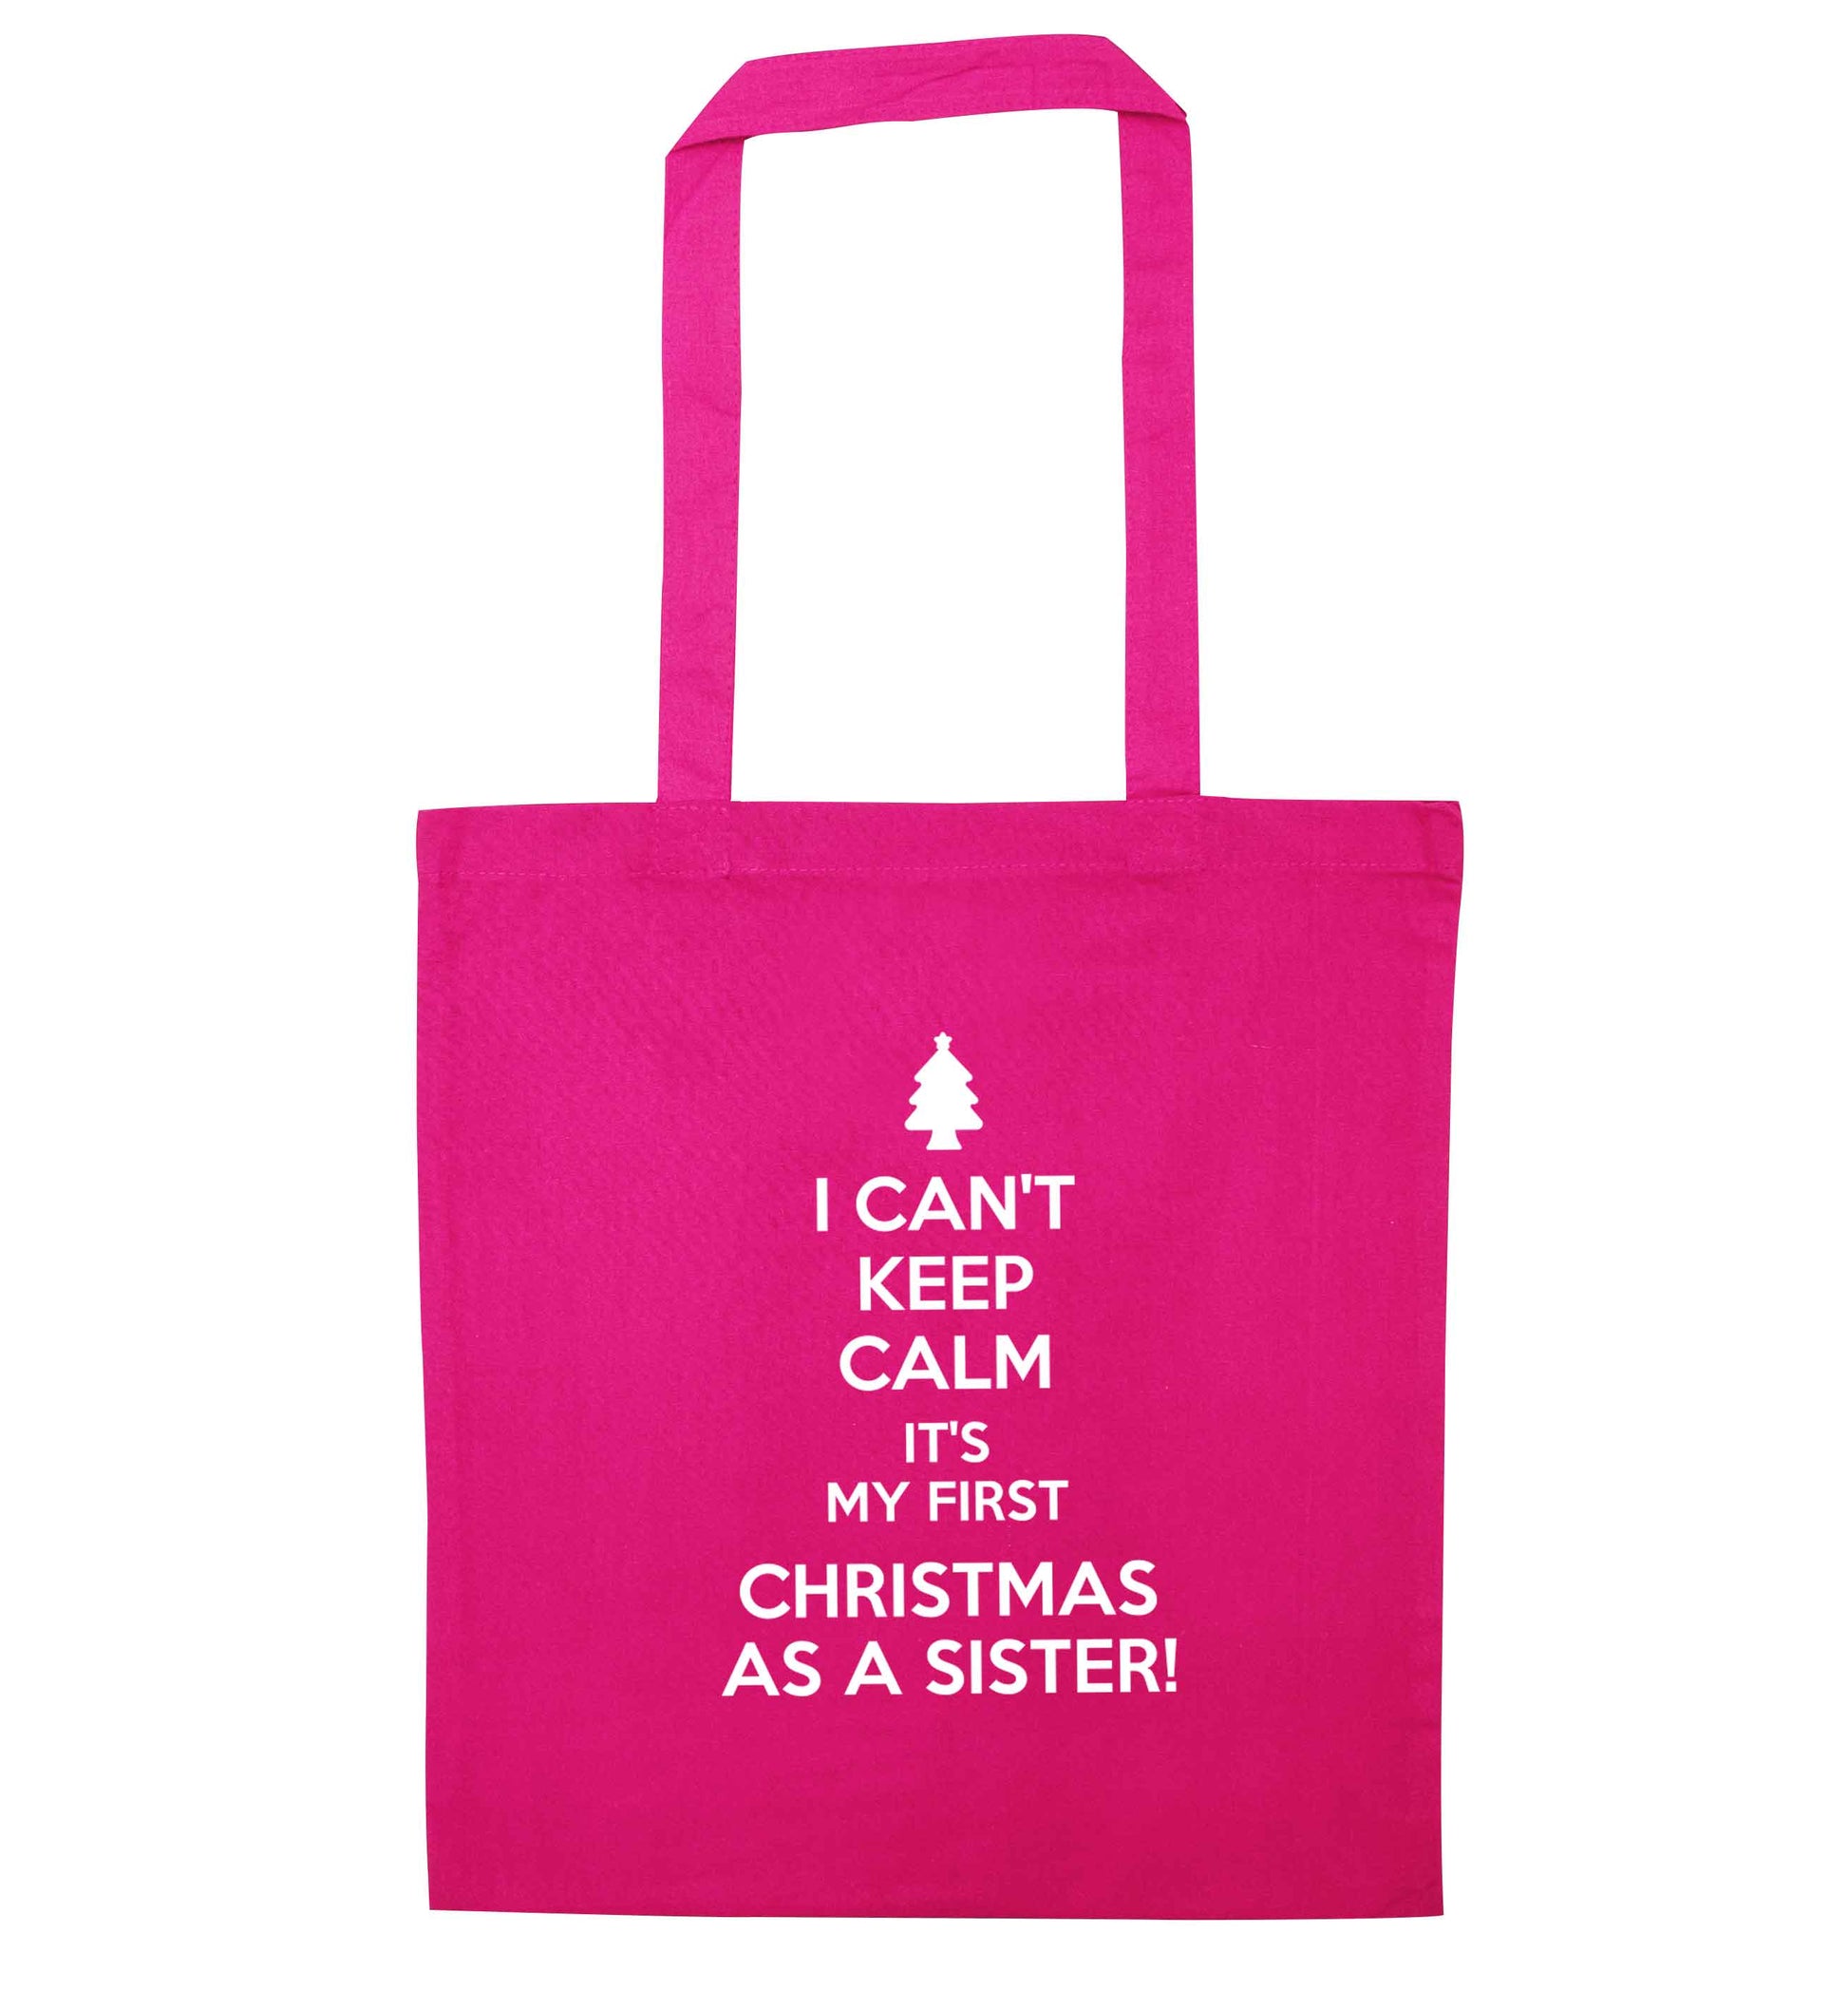 I can't keep calm it's my first Christmas as a sister! pink tote bag